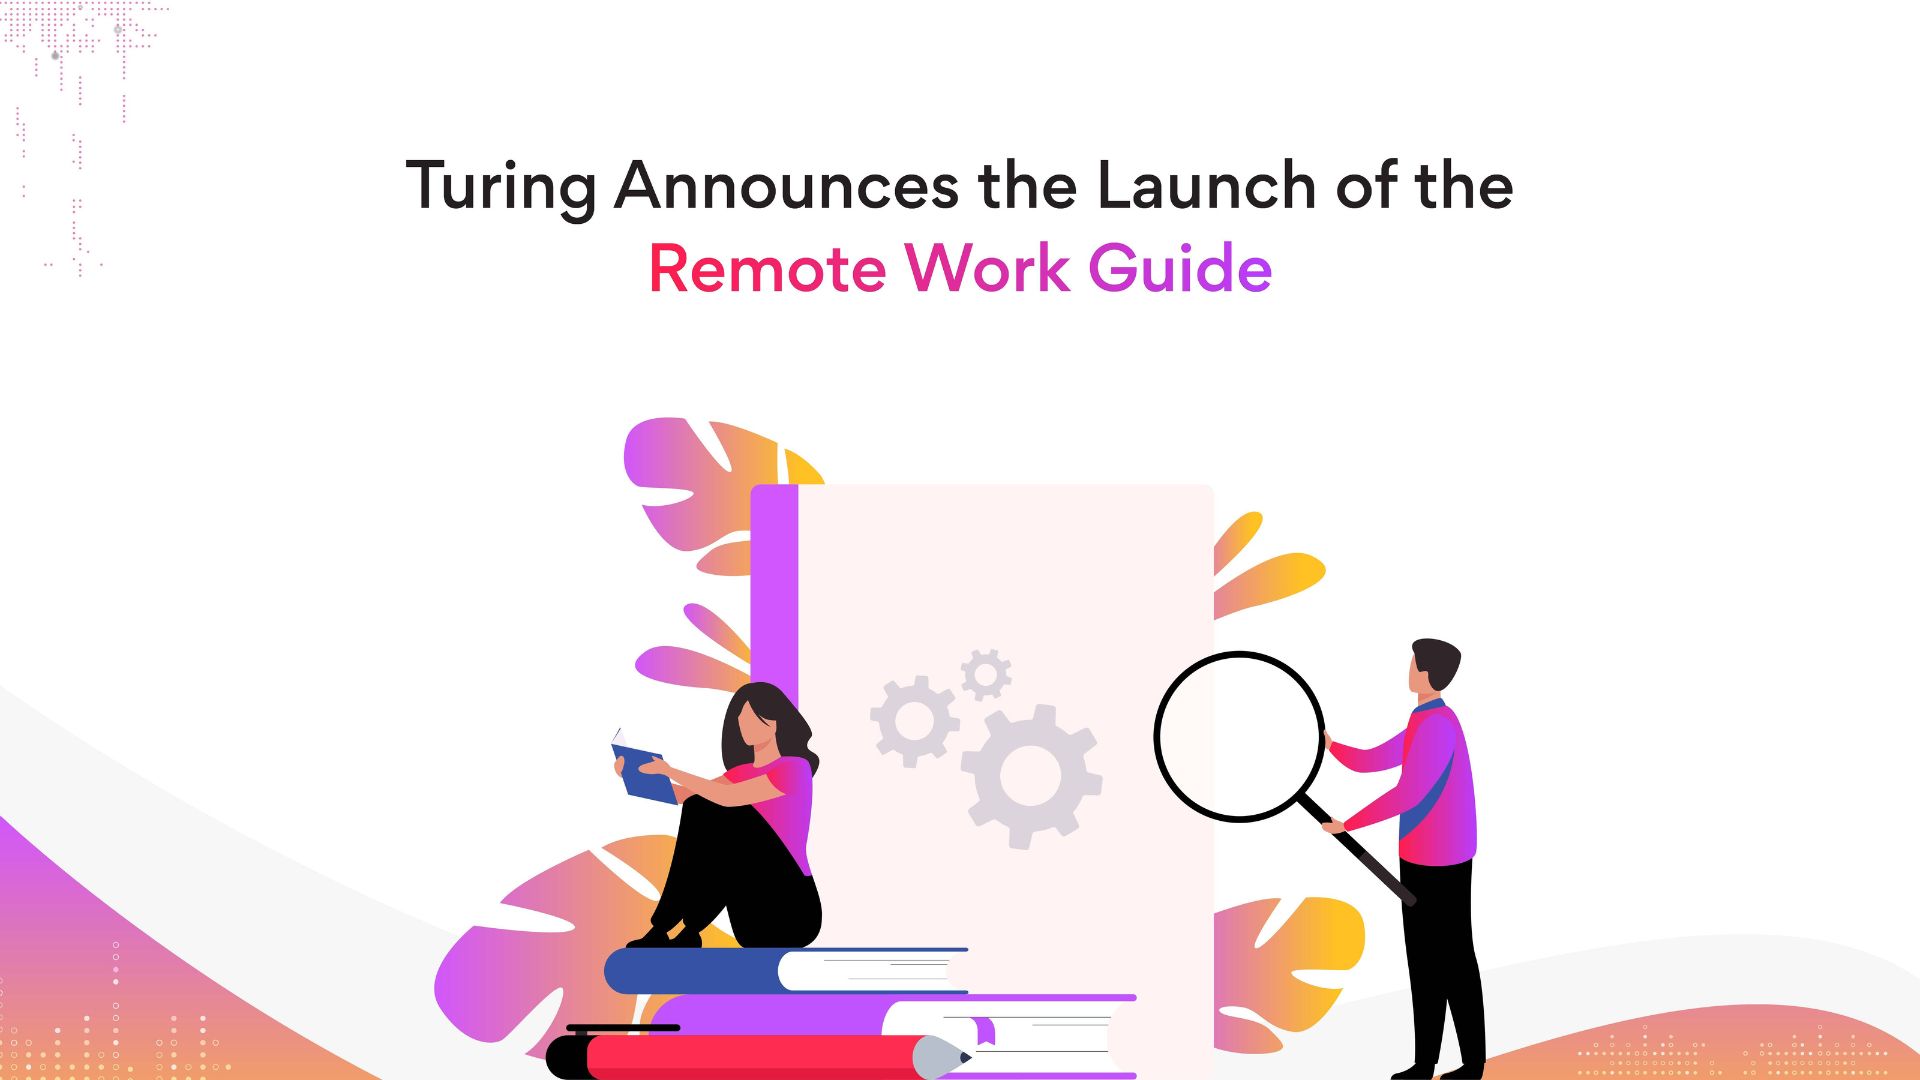 Turing.com launches Remote Work Guide